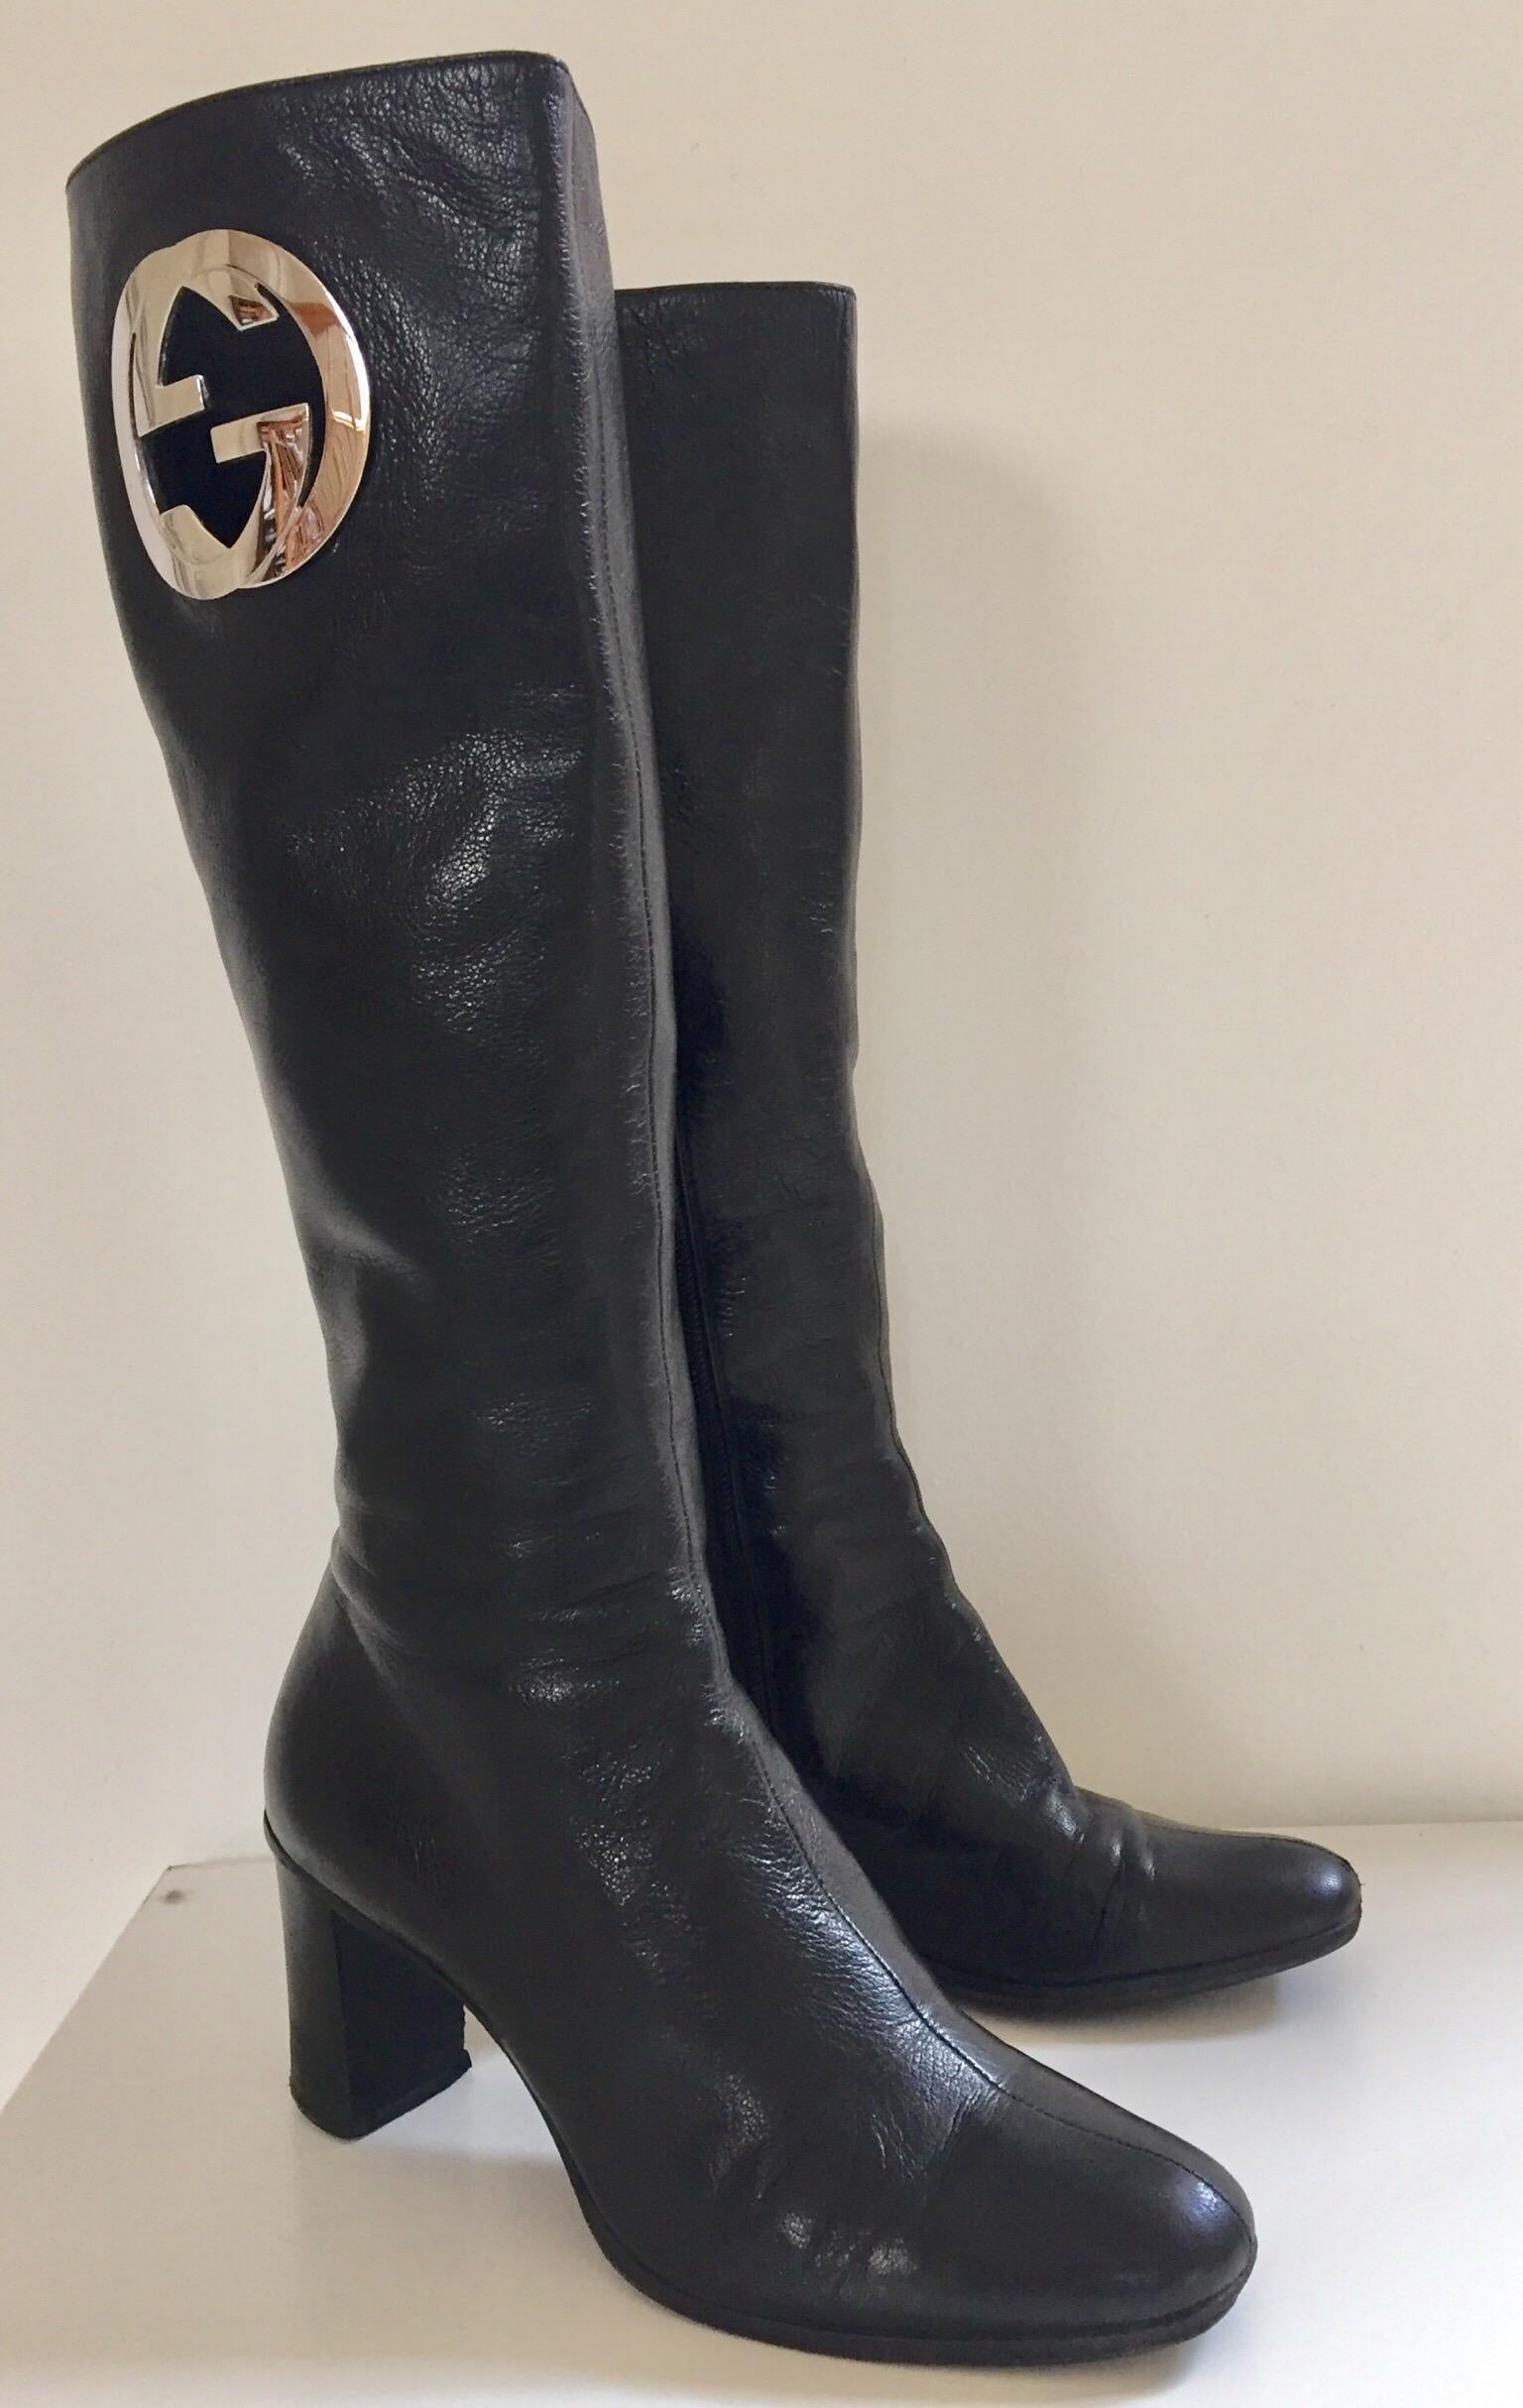 Vintage Tom Ford’s Gucci pair of knee-high leather boots, circa 1999.
In a sleek silhouette, these vintage Gucci boots are crafted in black lamb supple leather, finished with a block heel, side zipper and a prominent monogram in silver tones on only